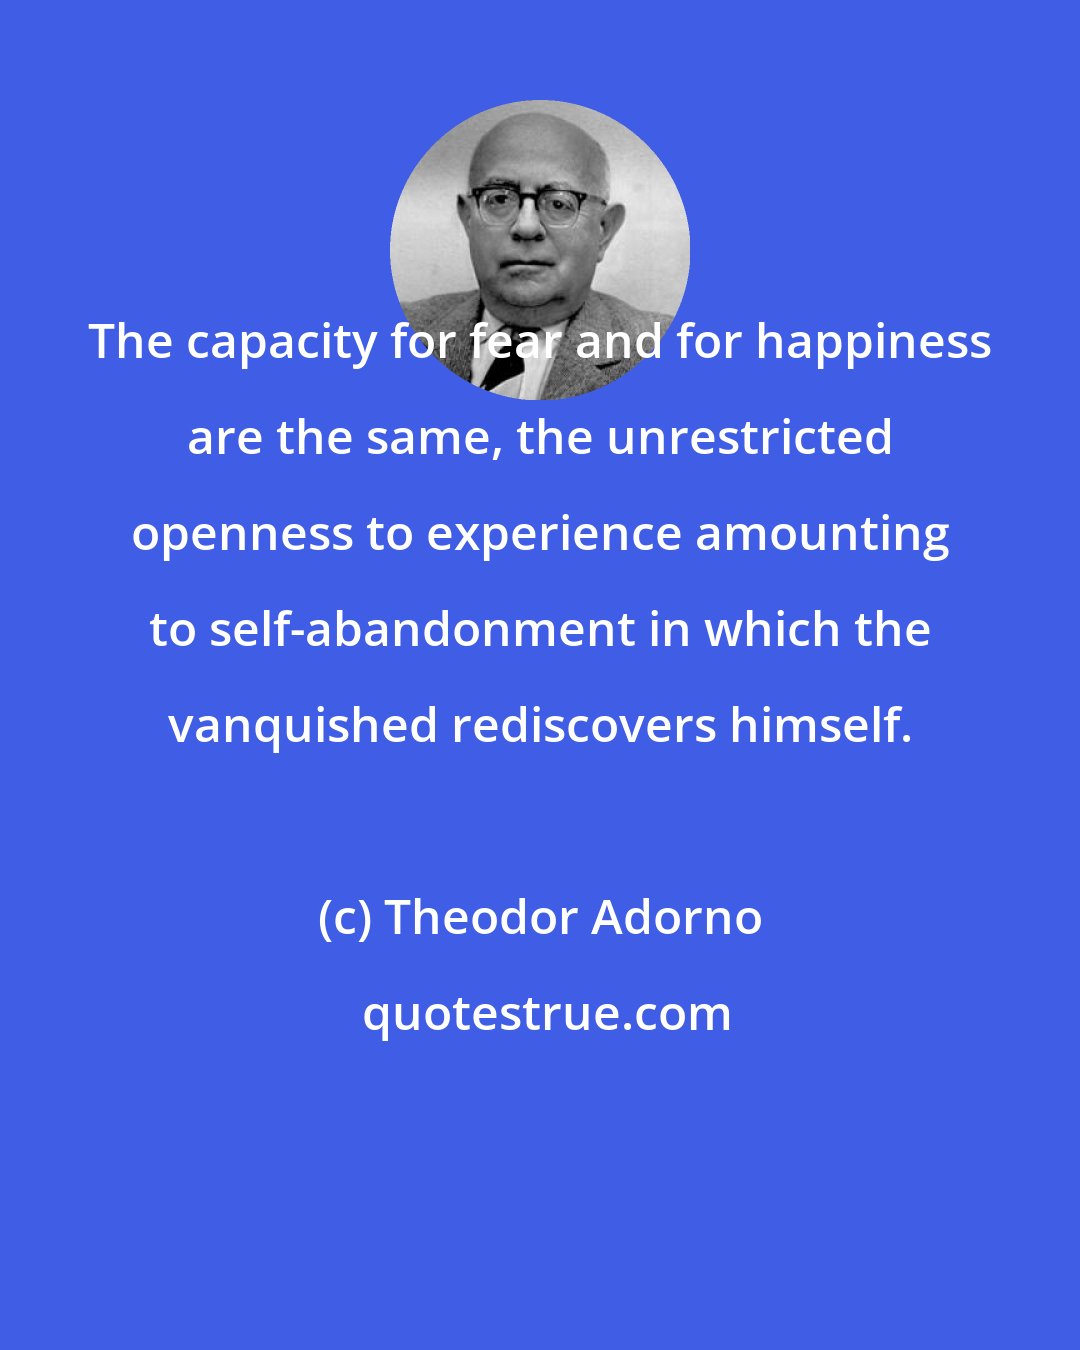 Theodor Adorno: The capacity for fear and for happiness are the same, the unrestricted openness to experience amounting to self-abandonment in which the vanquished rediscovers himself.